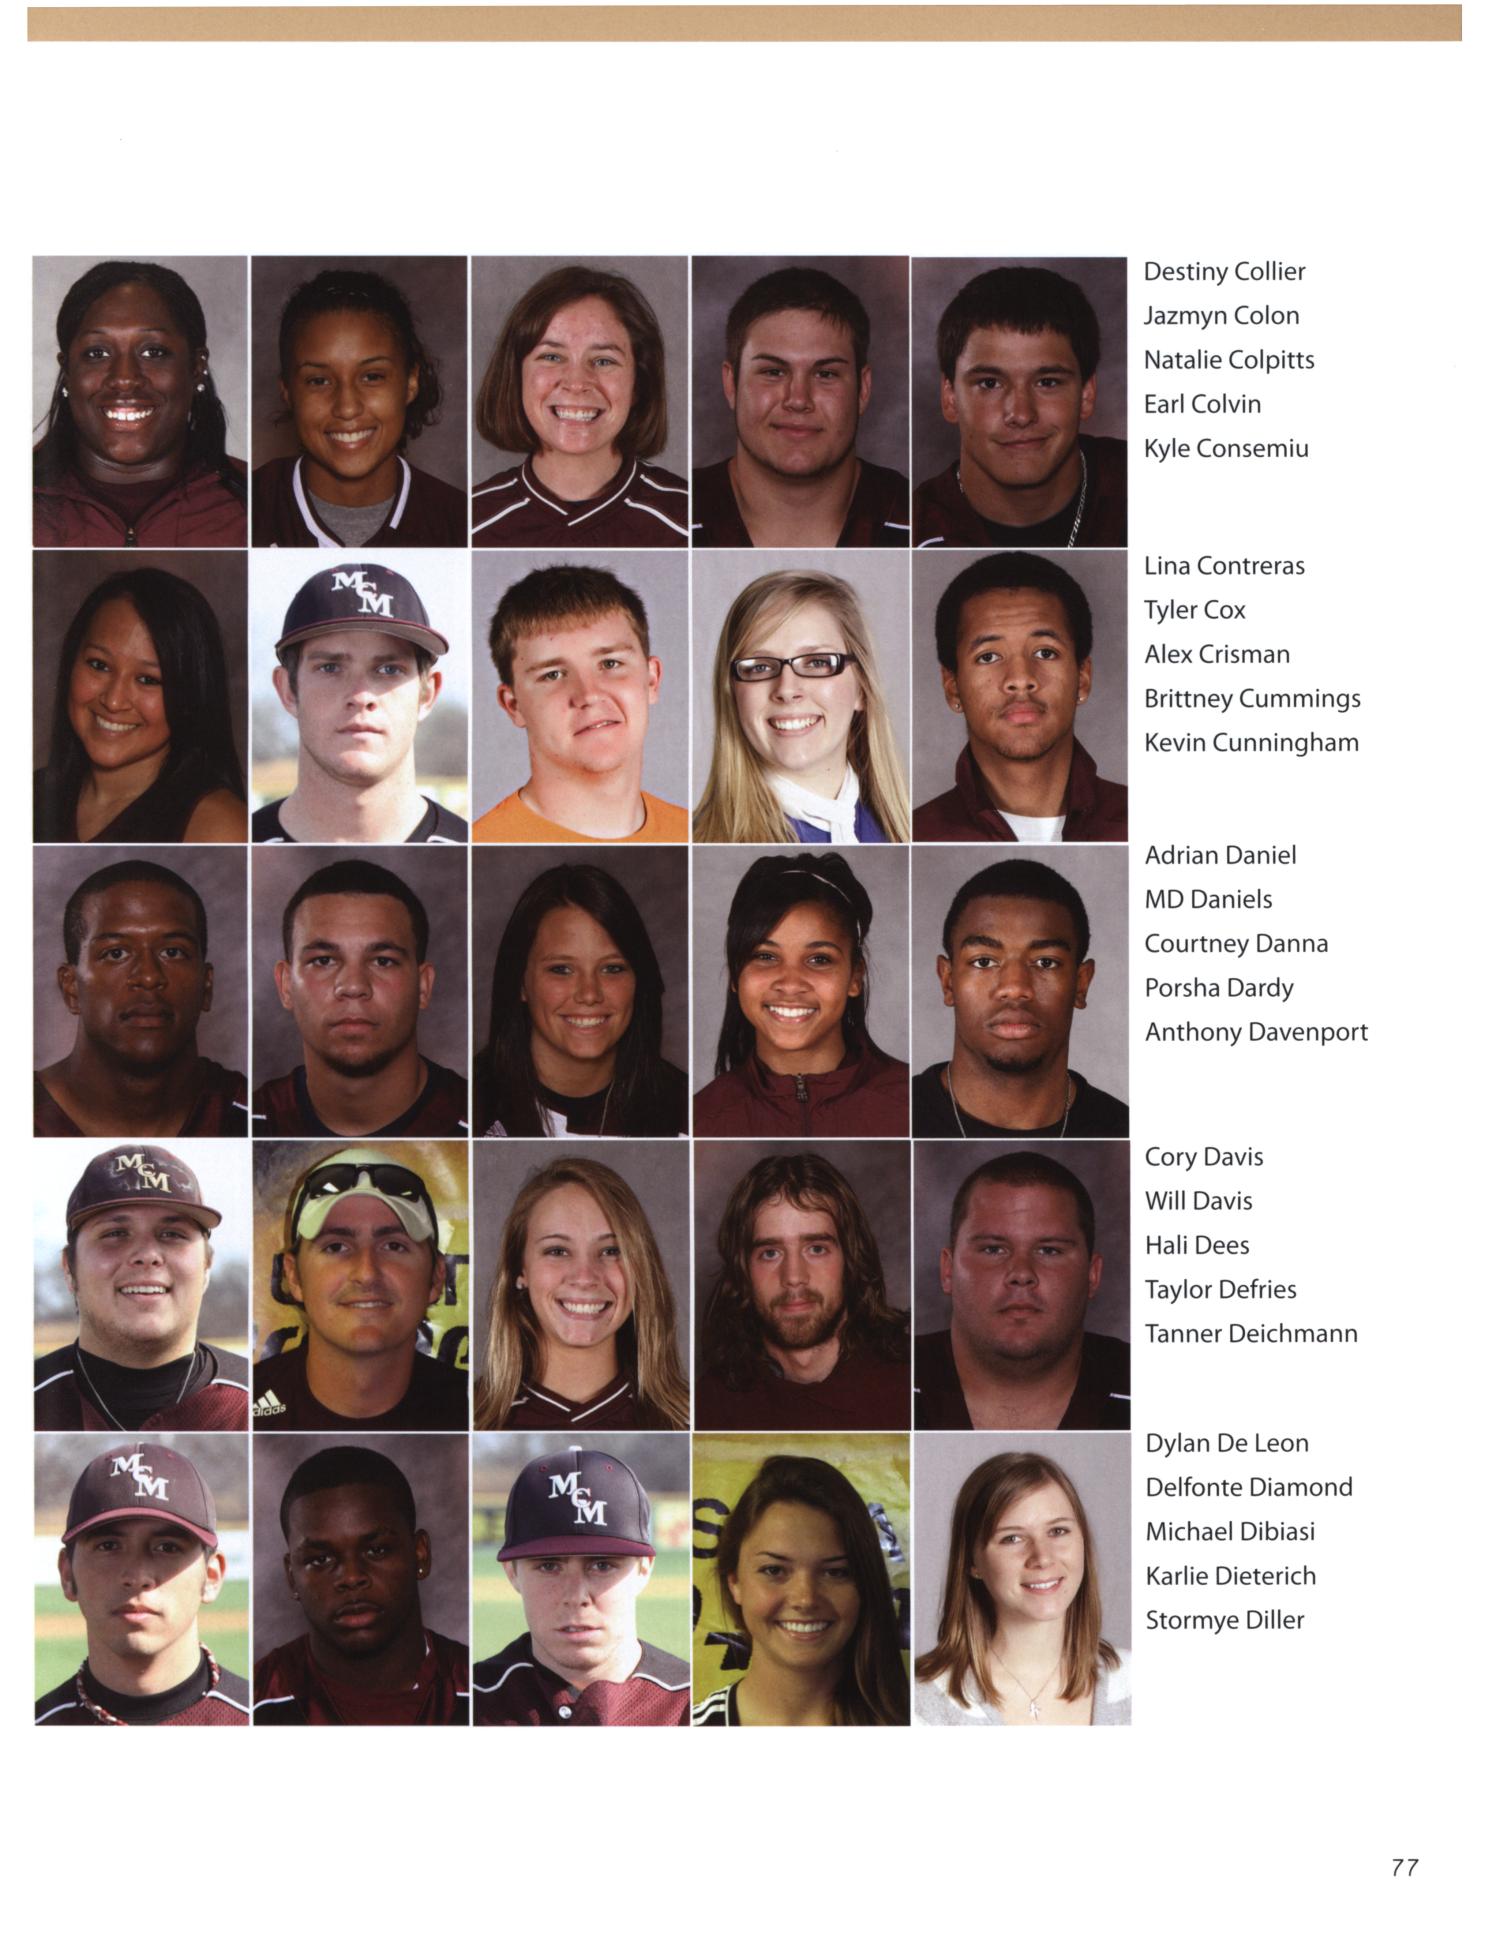 The Totem, Yearbook of McMurry University, 2010
                                                
                                                    77
                                                